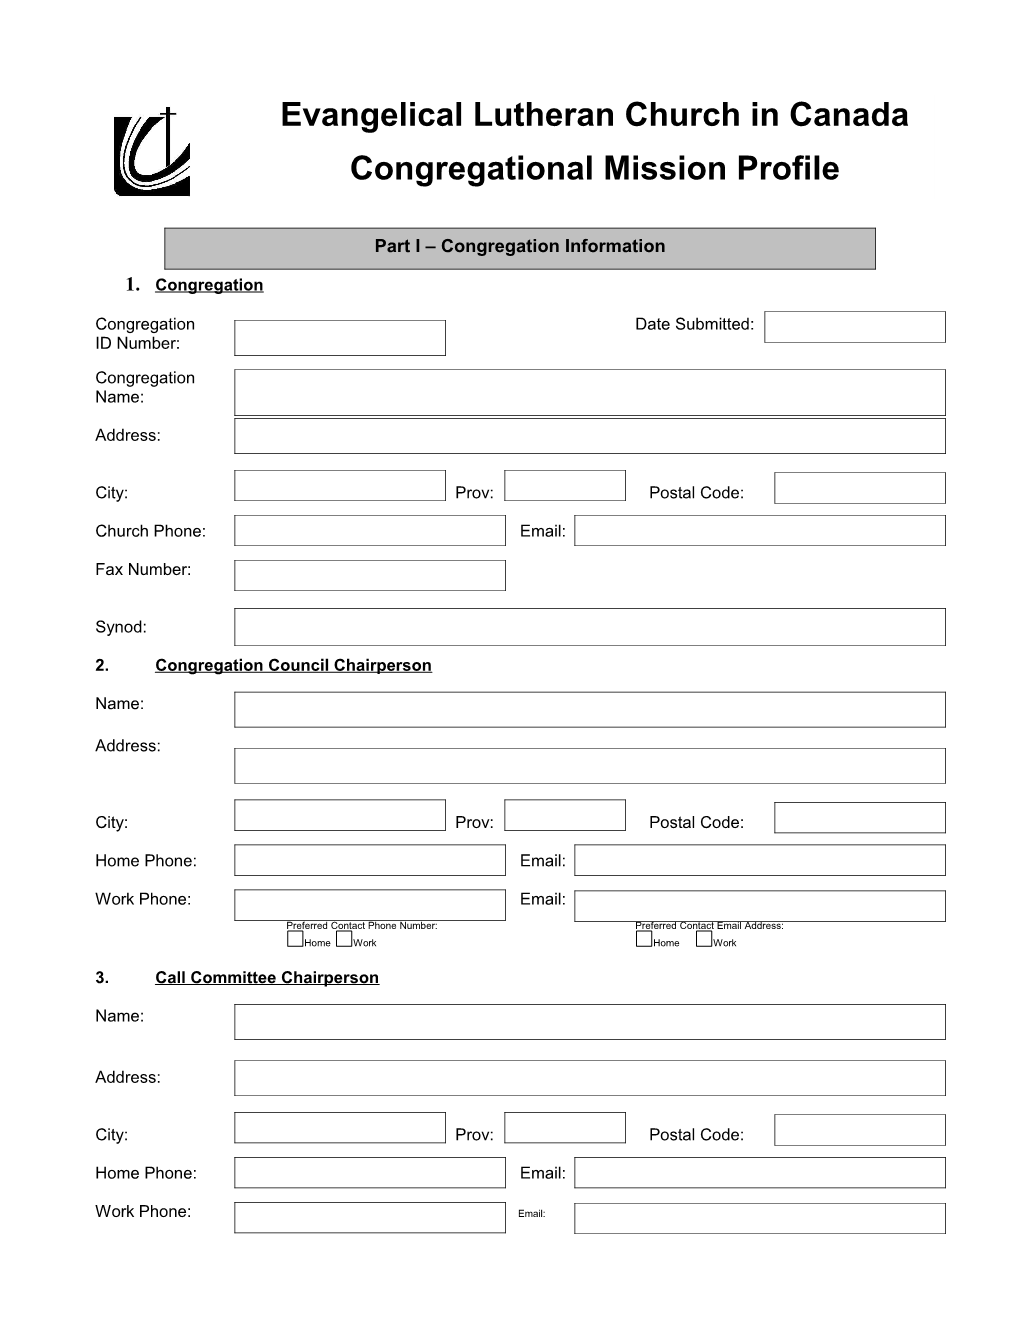 Congregationdate Submitted